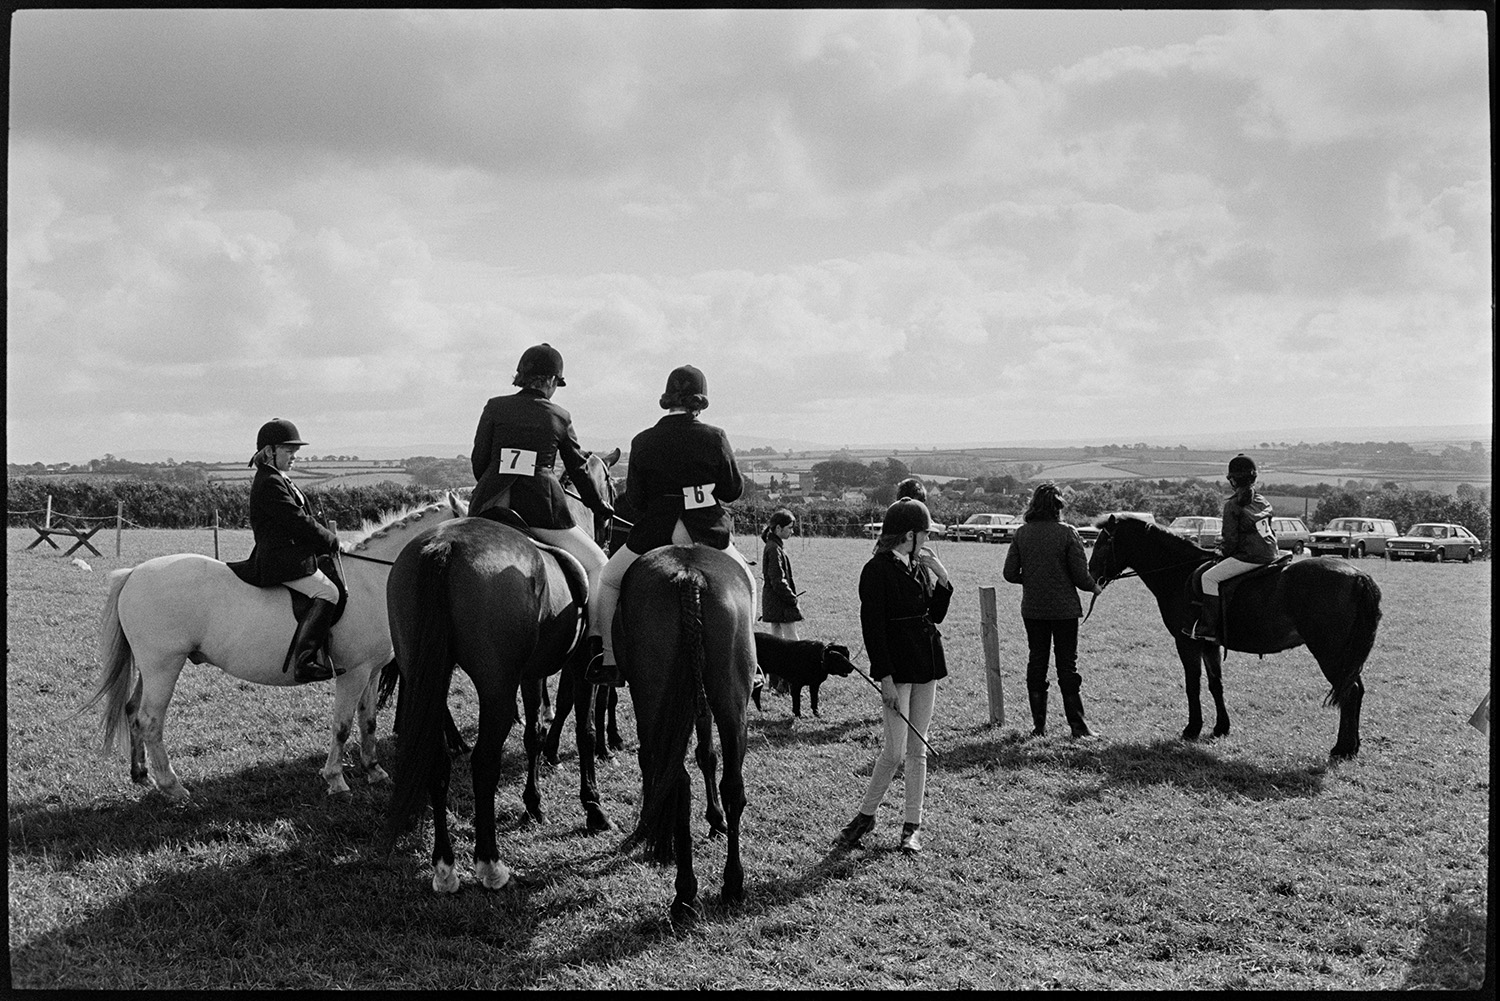 Horses and riders at gymkhana. 
[Mounted horse riders waiting to compete at Dolton Gymkhana. Some of the competitors are children. Parked cars can be seen in the field in the background.]